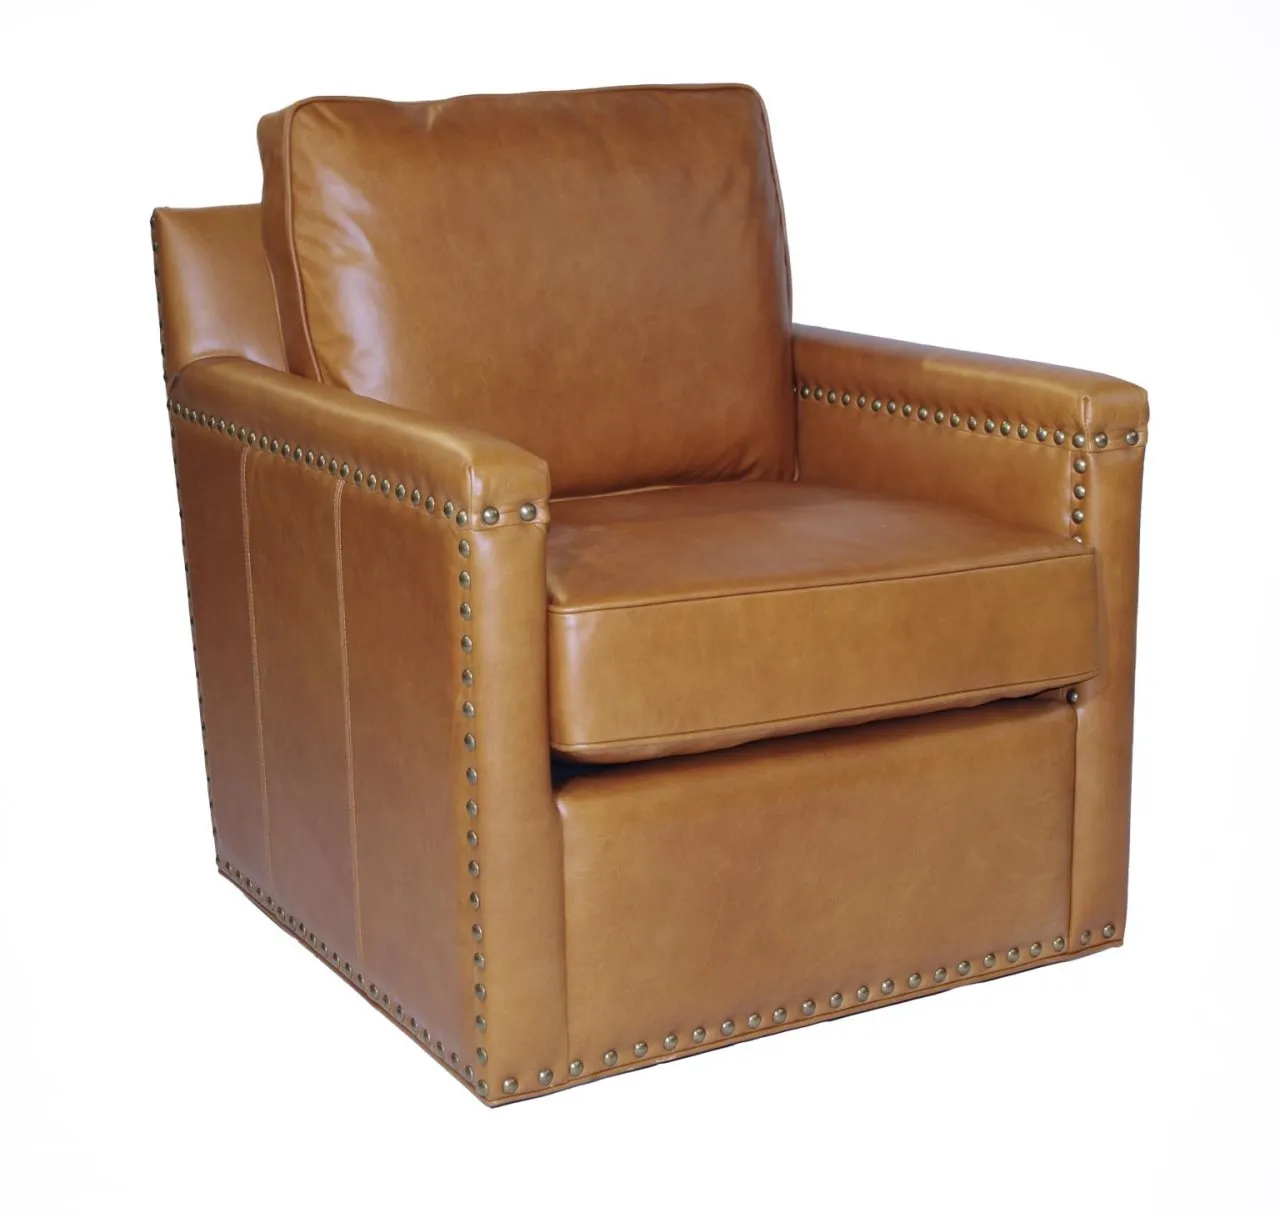 MERCER SWIVEL ACCENT CHAIR IN CARAMEL LEATHER